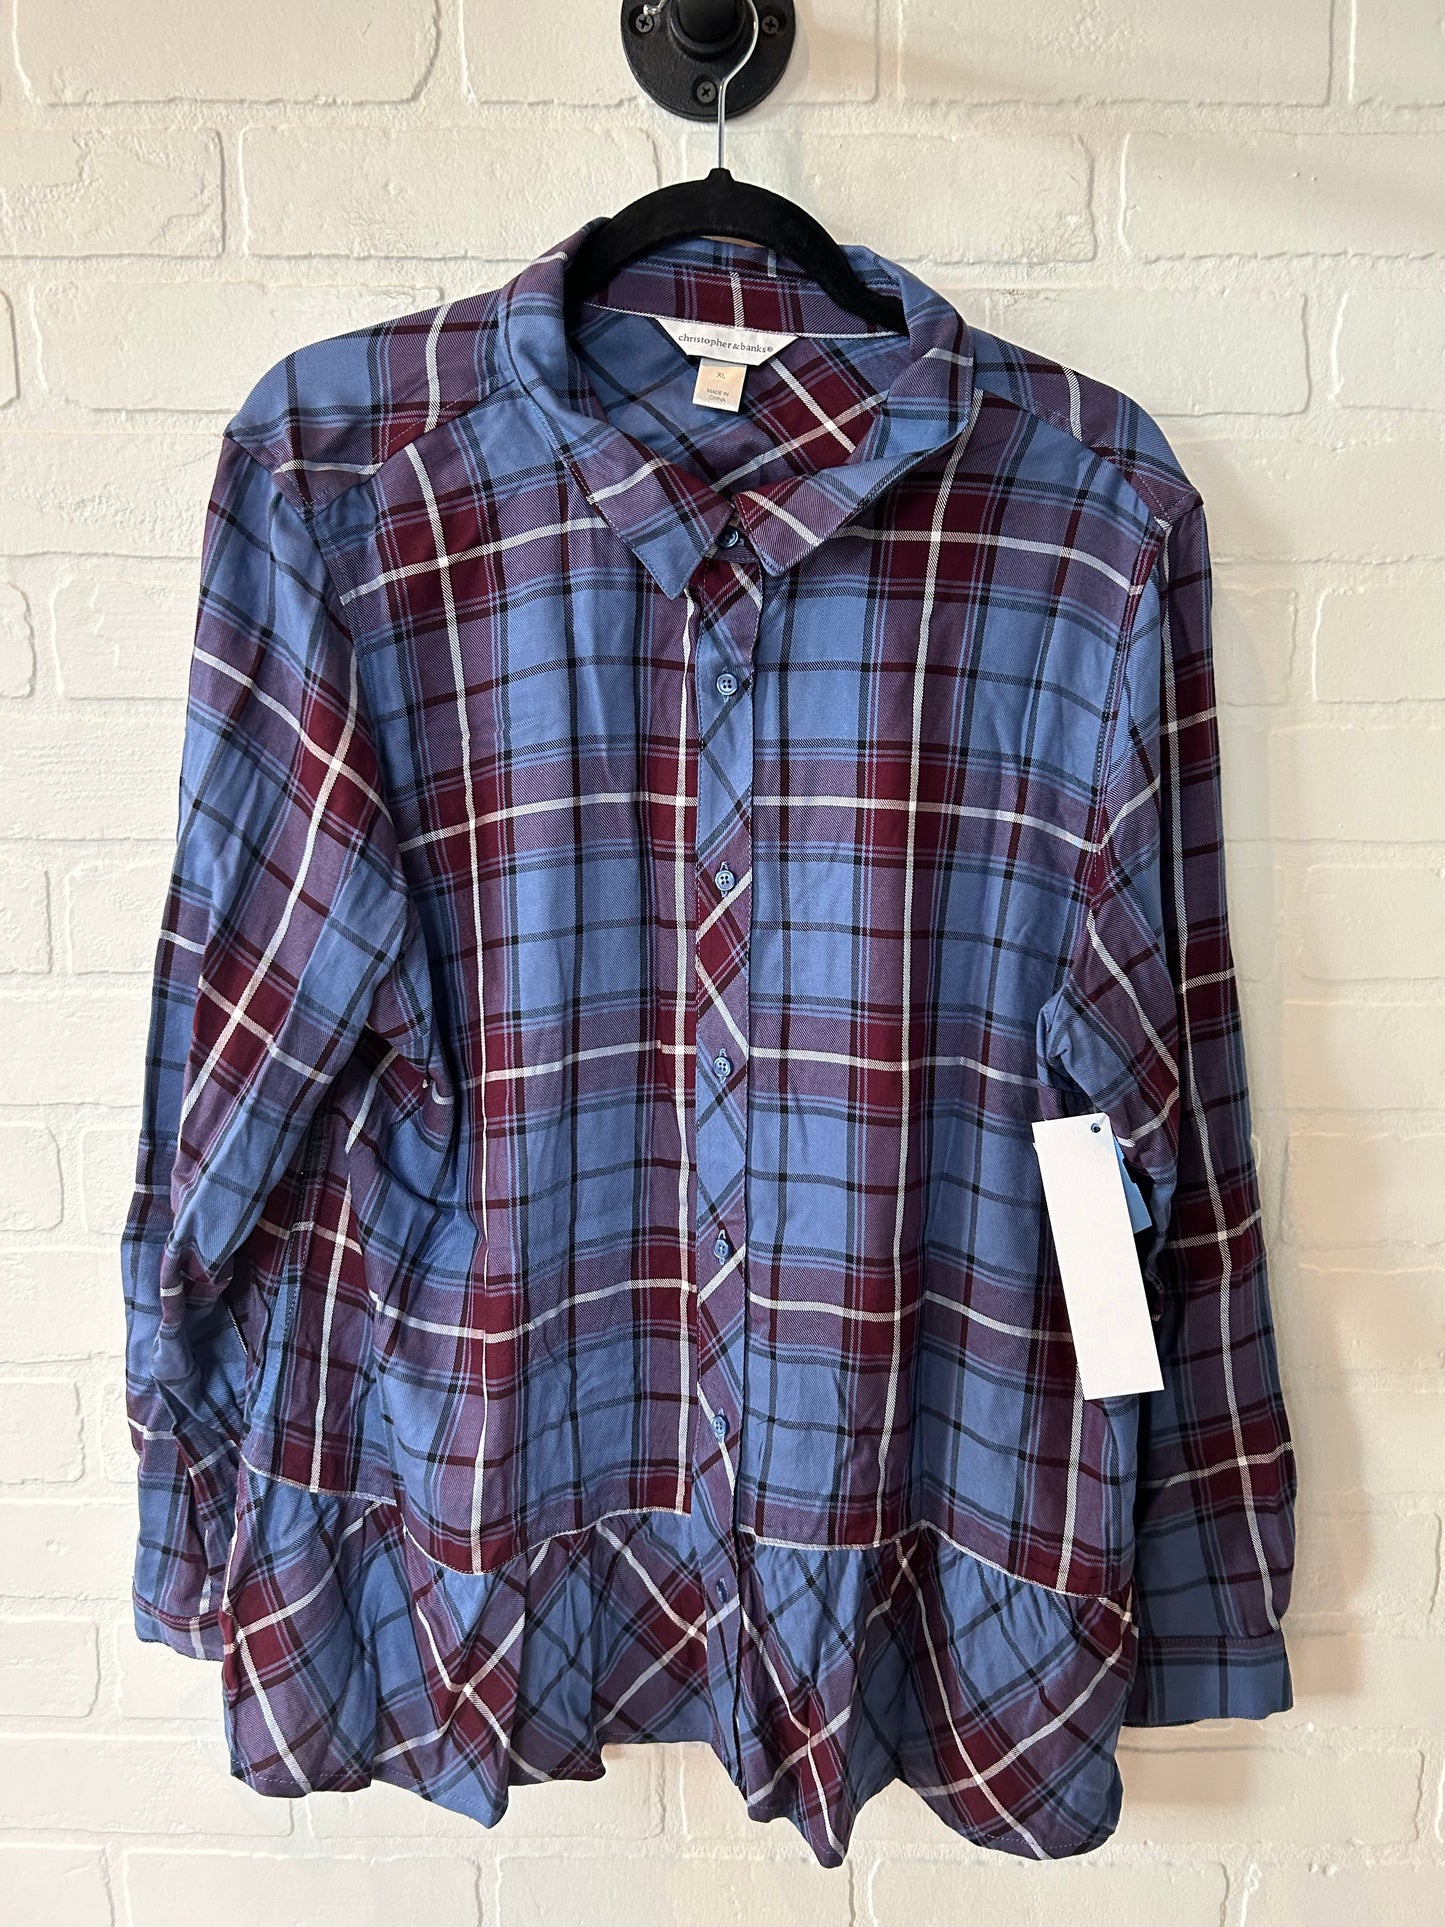 Plaid Top Long Sleeve Christopher And Banks, Size Xl